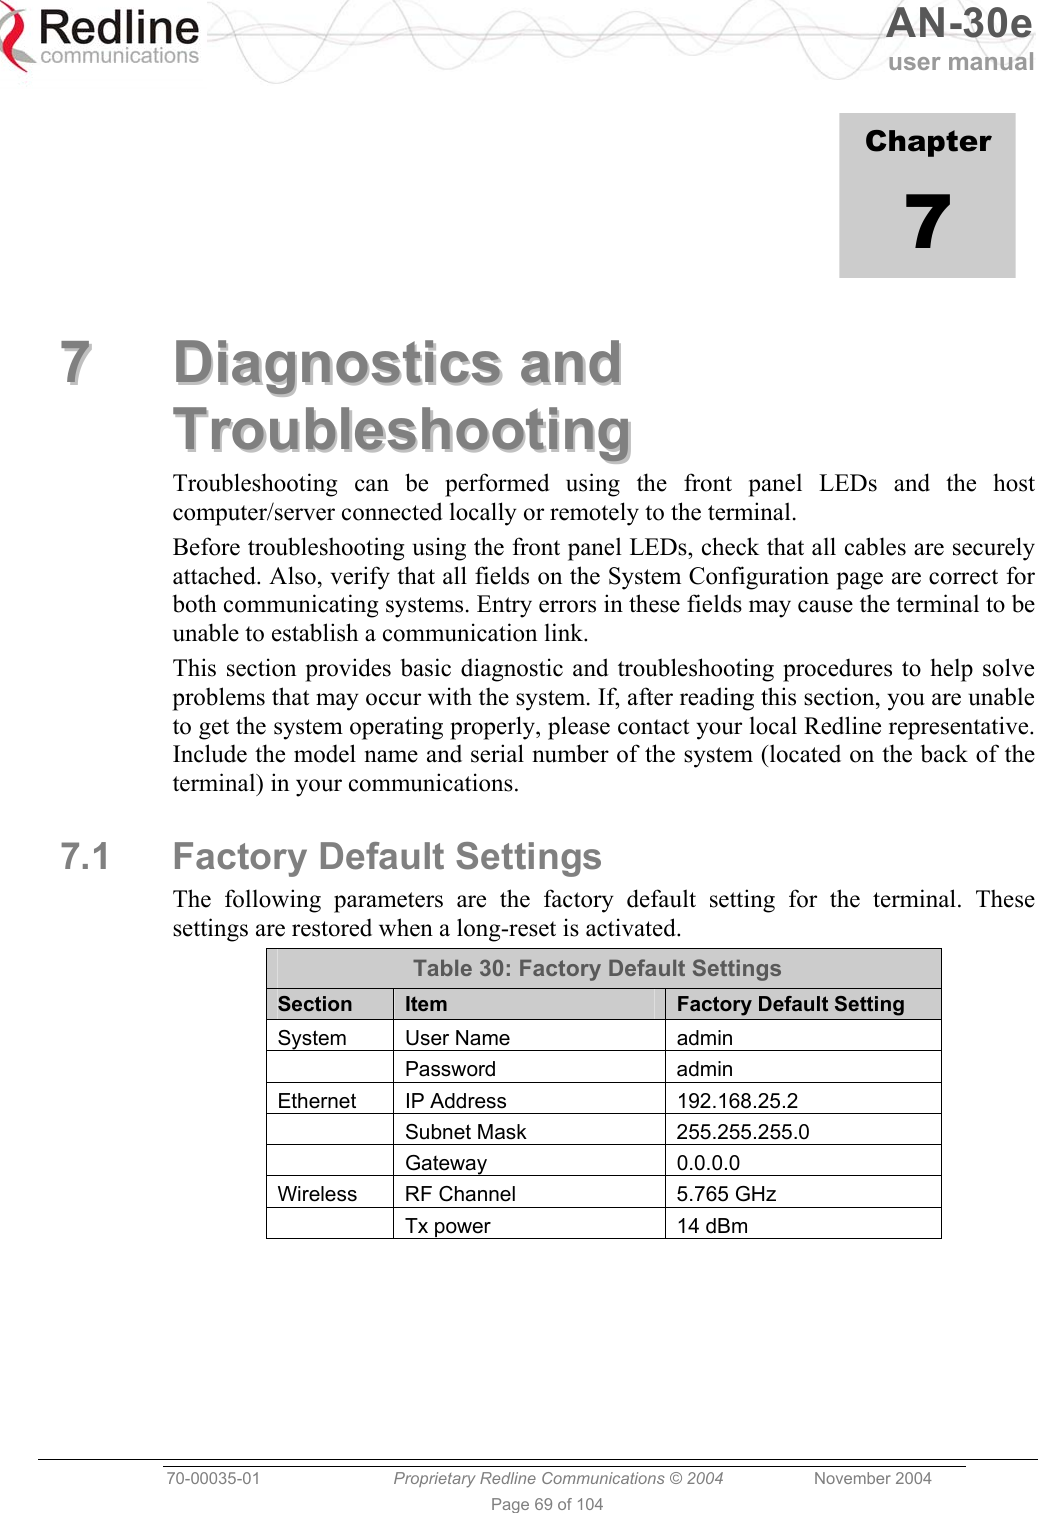   AN-30e user manual  70-00035-01  Proprietary Redline Communications © 2004 November 2004   Page 69 of 104             Chapter 7 77  DDiiaaggnnoossttiiccss  aanndd  TTrroouubblleesshhoooottiinngg  Troubleshooting can be performed using the front panel LEDs and the host computer/server connected locally or remotely to the terminal. Before troubleshooting using the front panel LEDs, check that all cables are securely attached. Also, verify that all fields on the System Configuration page are correct for both communicating systems. Entry errors in these fields may cause the terminal to be unable to establish a communication link. This section provides basic diagnostic and troubleshooting procedures to help solve problems that may occur with the system. If, after reading this section, you are unable to get the system operating properly, please contact your local Redline representative. Include the model name and serial number of the system (located on the back of the terminal) in your communications. 7.1  Factory Default Settings The following parameters are the factory default setting for the terminal. These settings are restored when a long-reset is activated.  Table 30: Factory Default Settings Section  Item  Factory Default Setting System User Name  admin  Password   admin Ethernet  IP Address   192.168.25.2  Subnet Mask   255.255.255.0  Gateway   0.0.0.0 Wireless  RF Channel  5.765 GHz   Tx power   14 dBm  